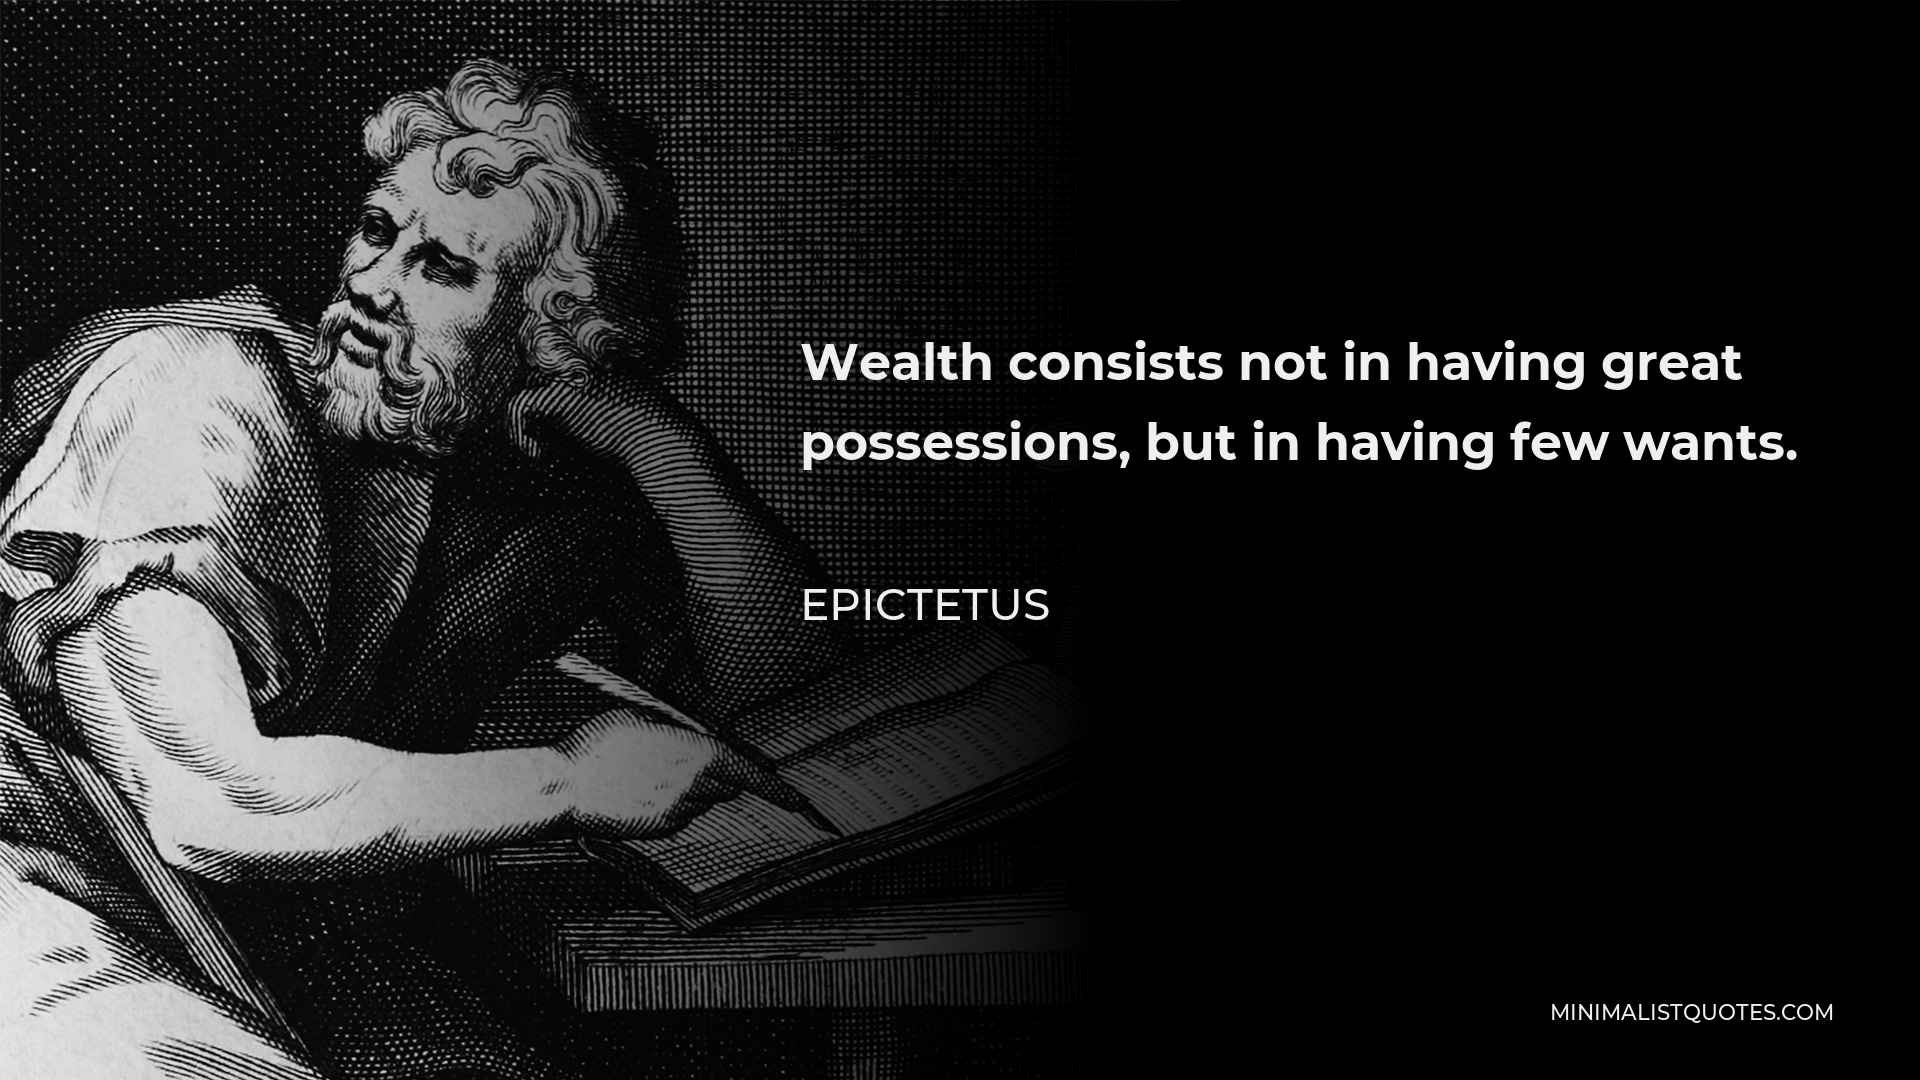 Epictetus Quote - Wealth consists not in having great possessions, but in having few wants.